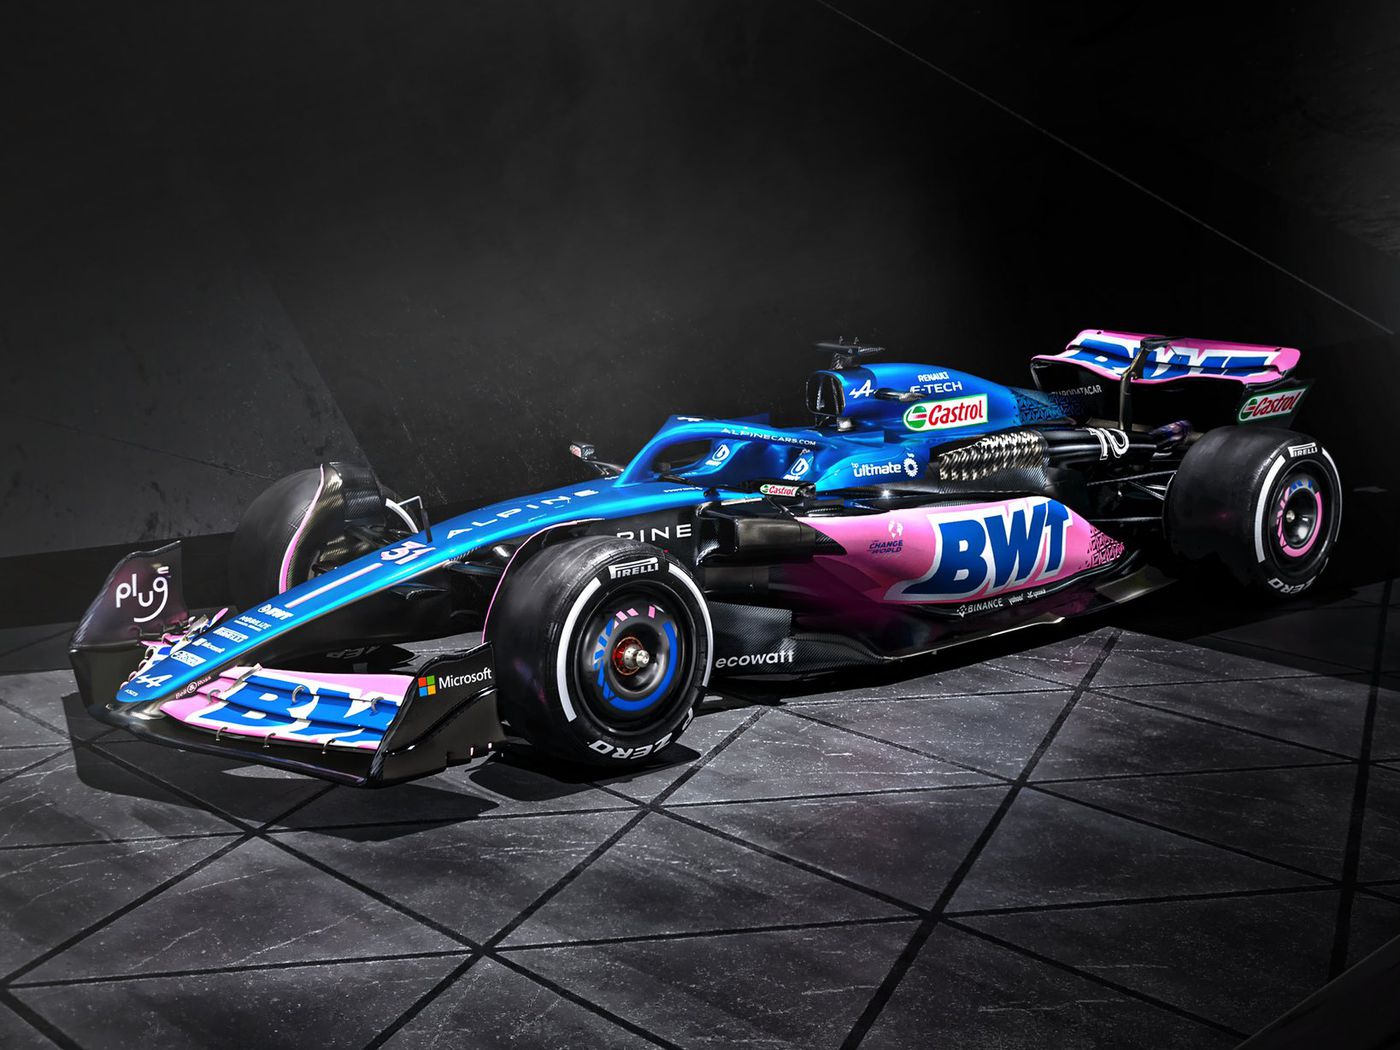 Alpine BWT F1 Team rounds out the field with their design for the 2023 season